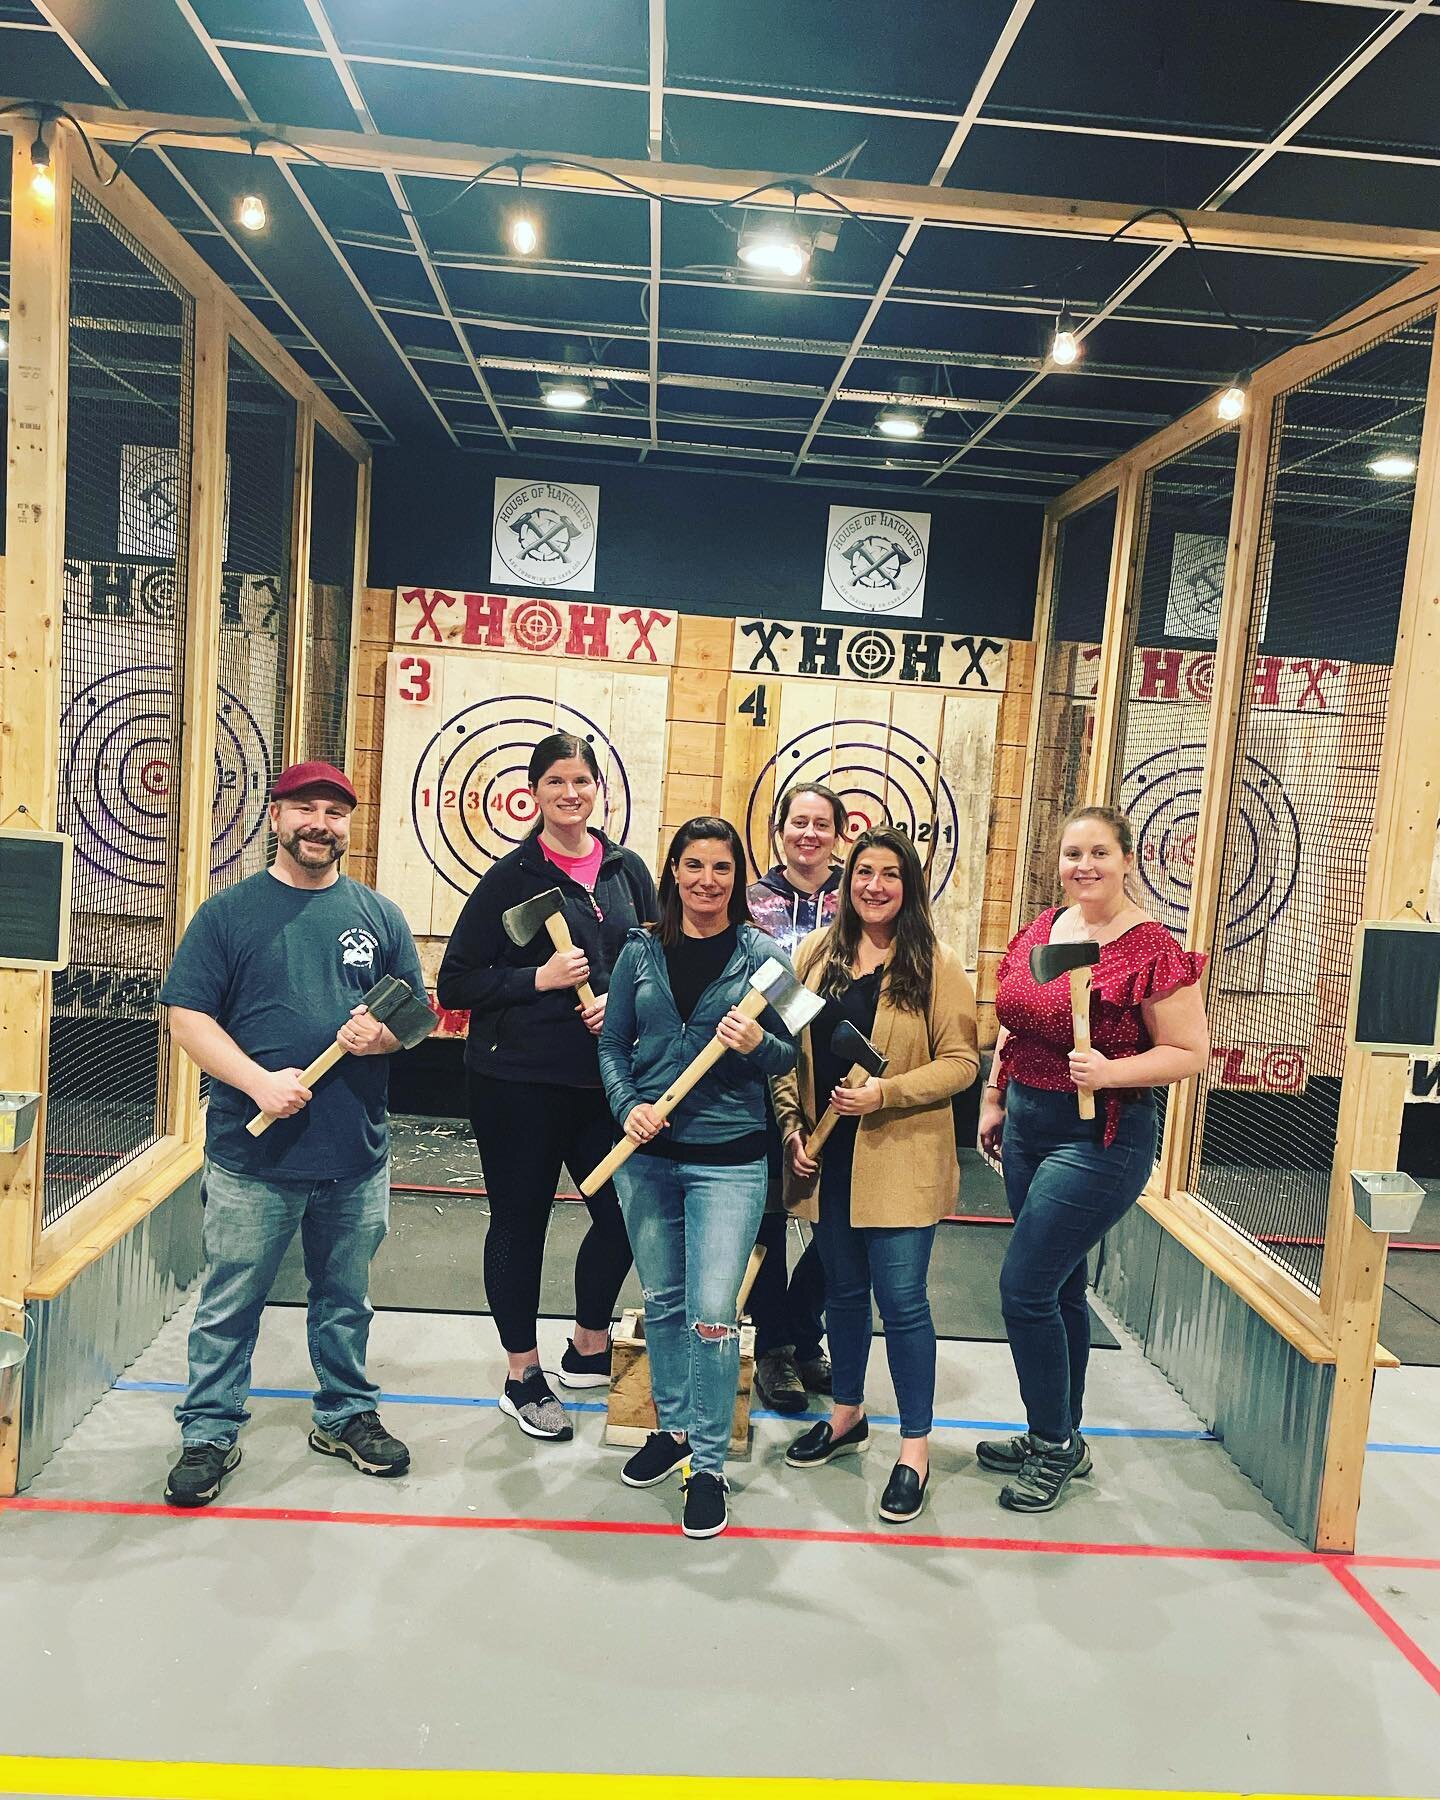 Congratulations Janice!! Nice win over a former league champion! 🪓🪓🪓 Thinking of joining an axe throwing league? Spring leagues will be starting soon! Visit our website capecodaxe.com for details and to sign up!